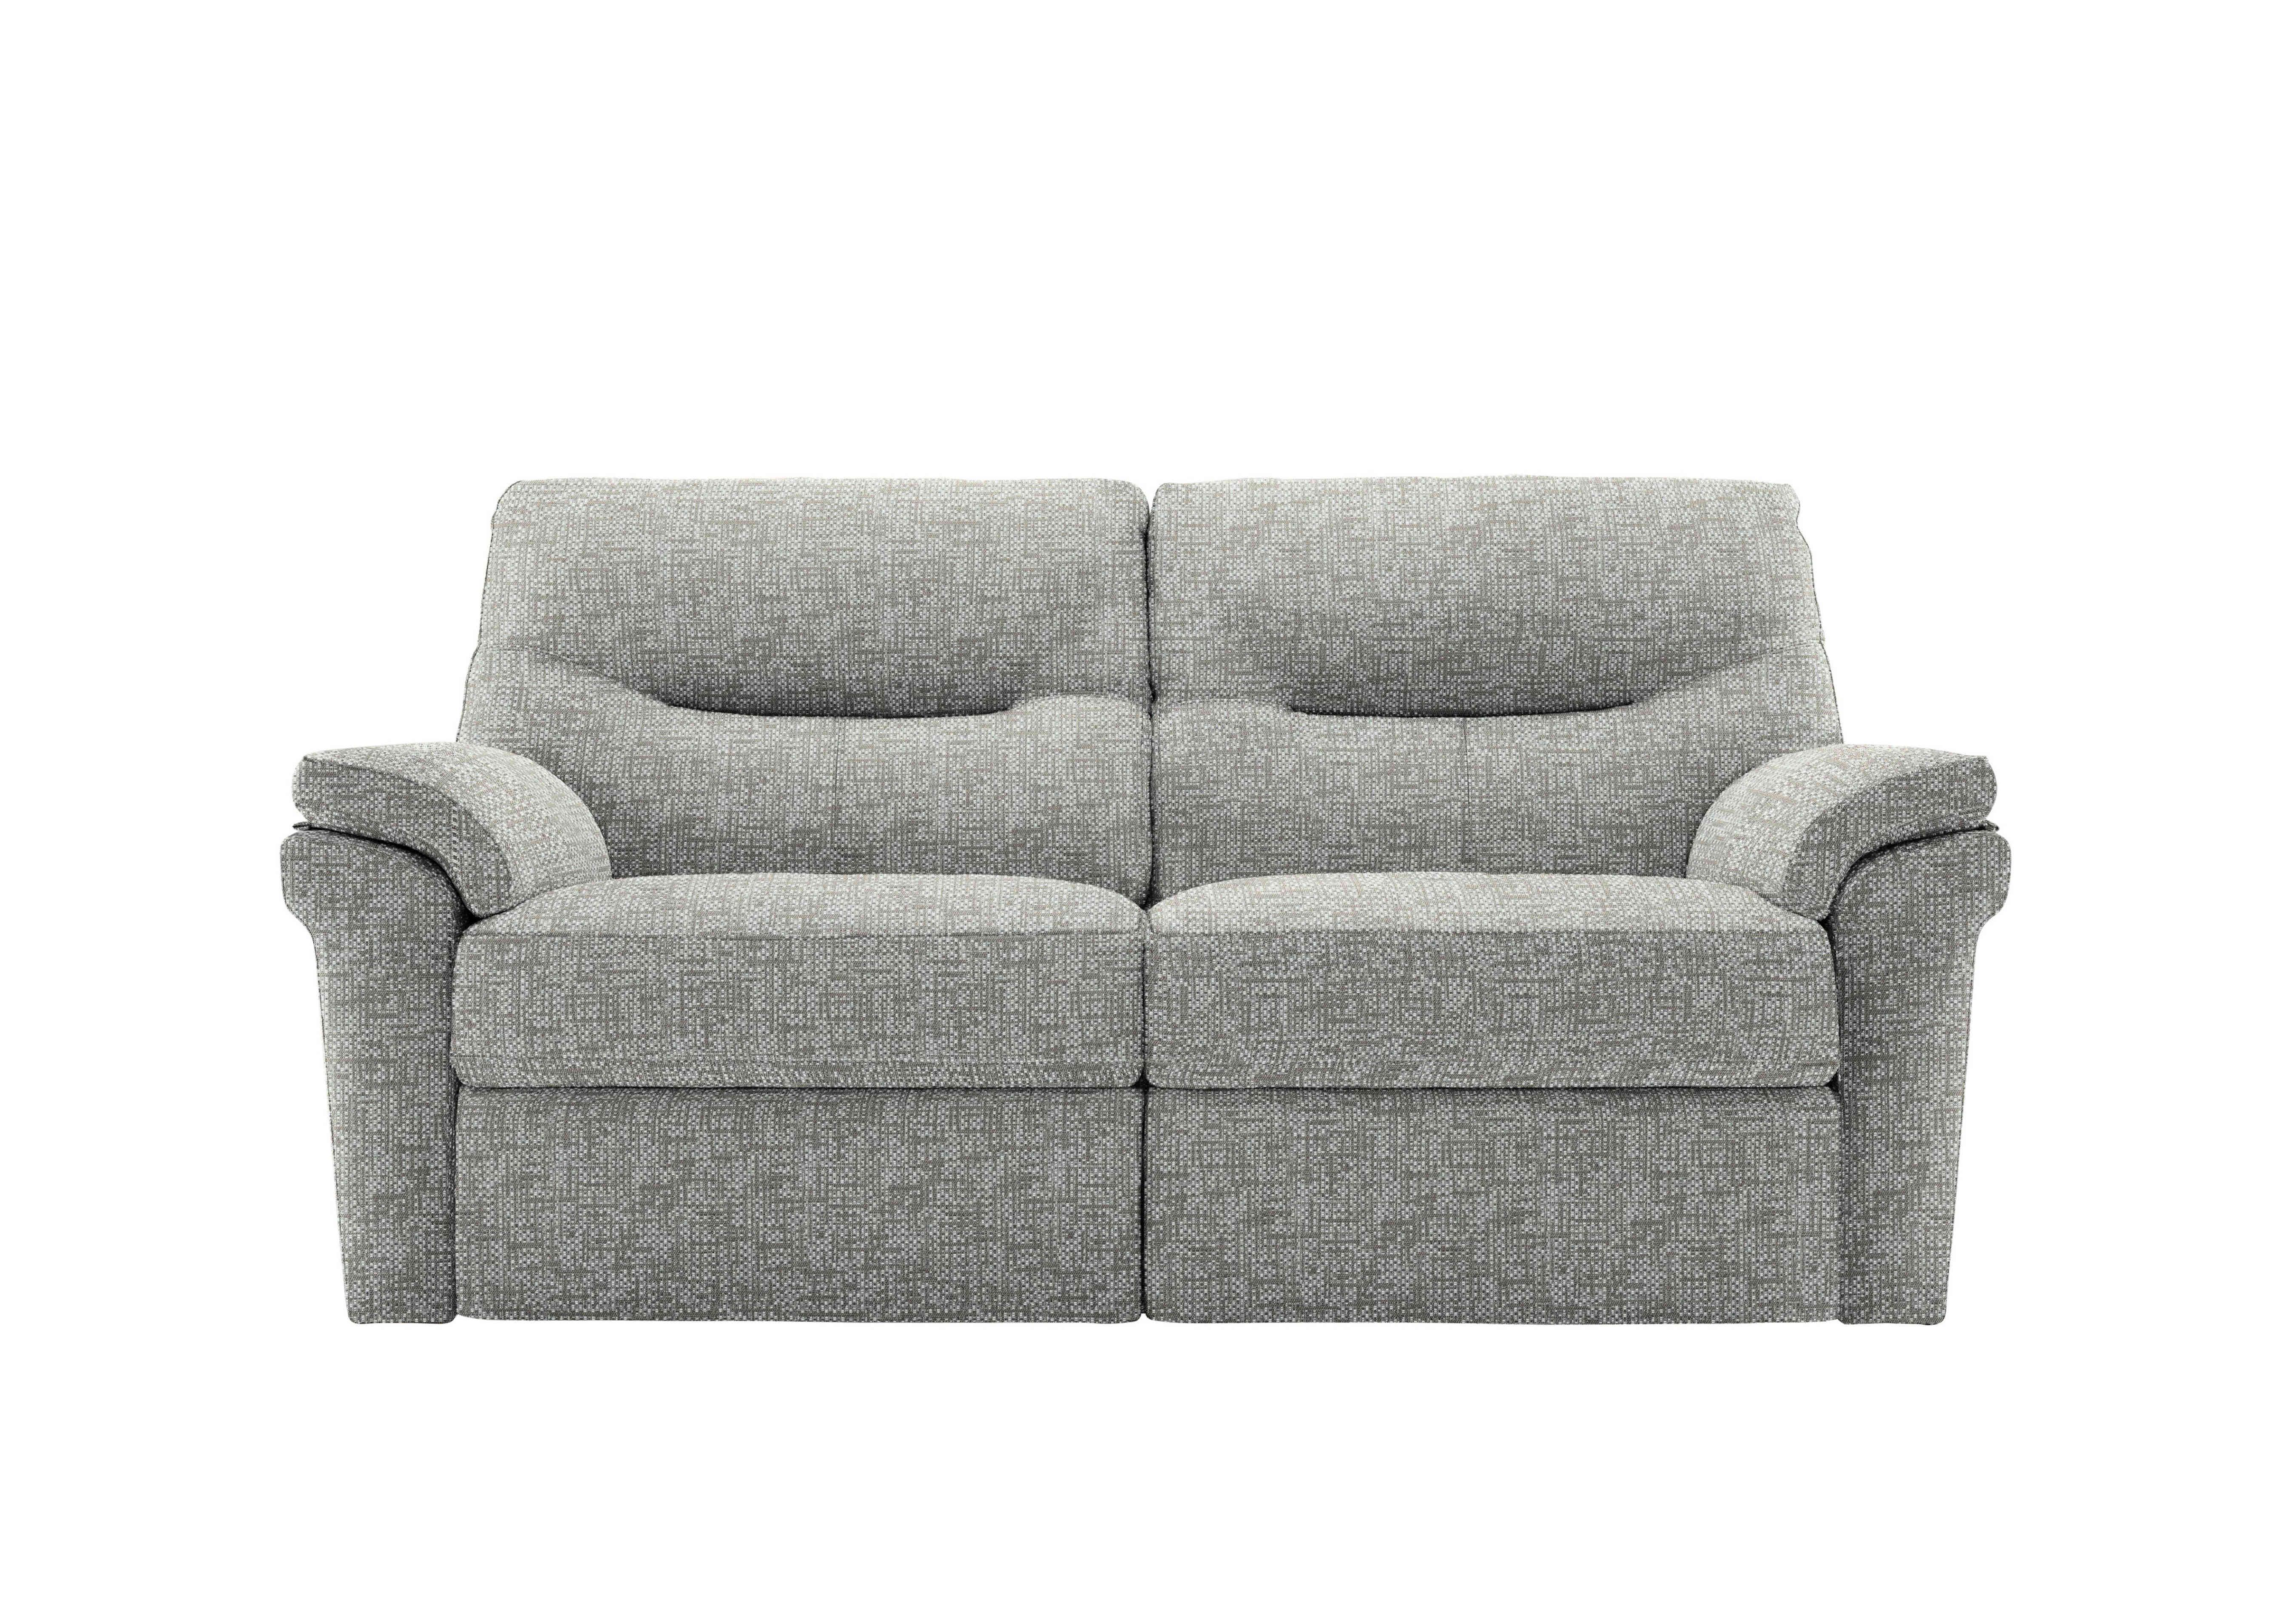 Seattle 2.5 Seater Fabric Sofa in B032 Remco Duck Egg on Furniture Village